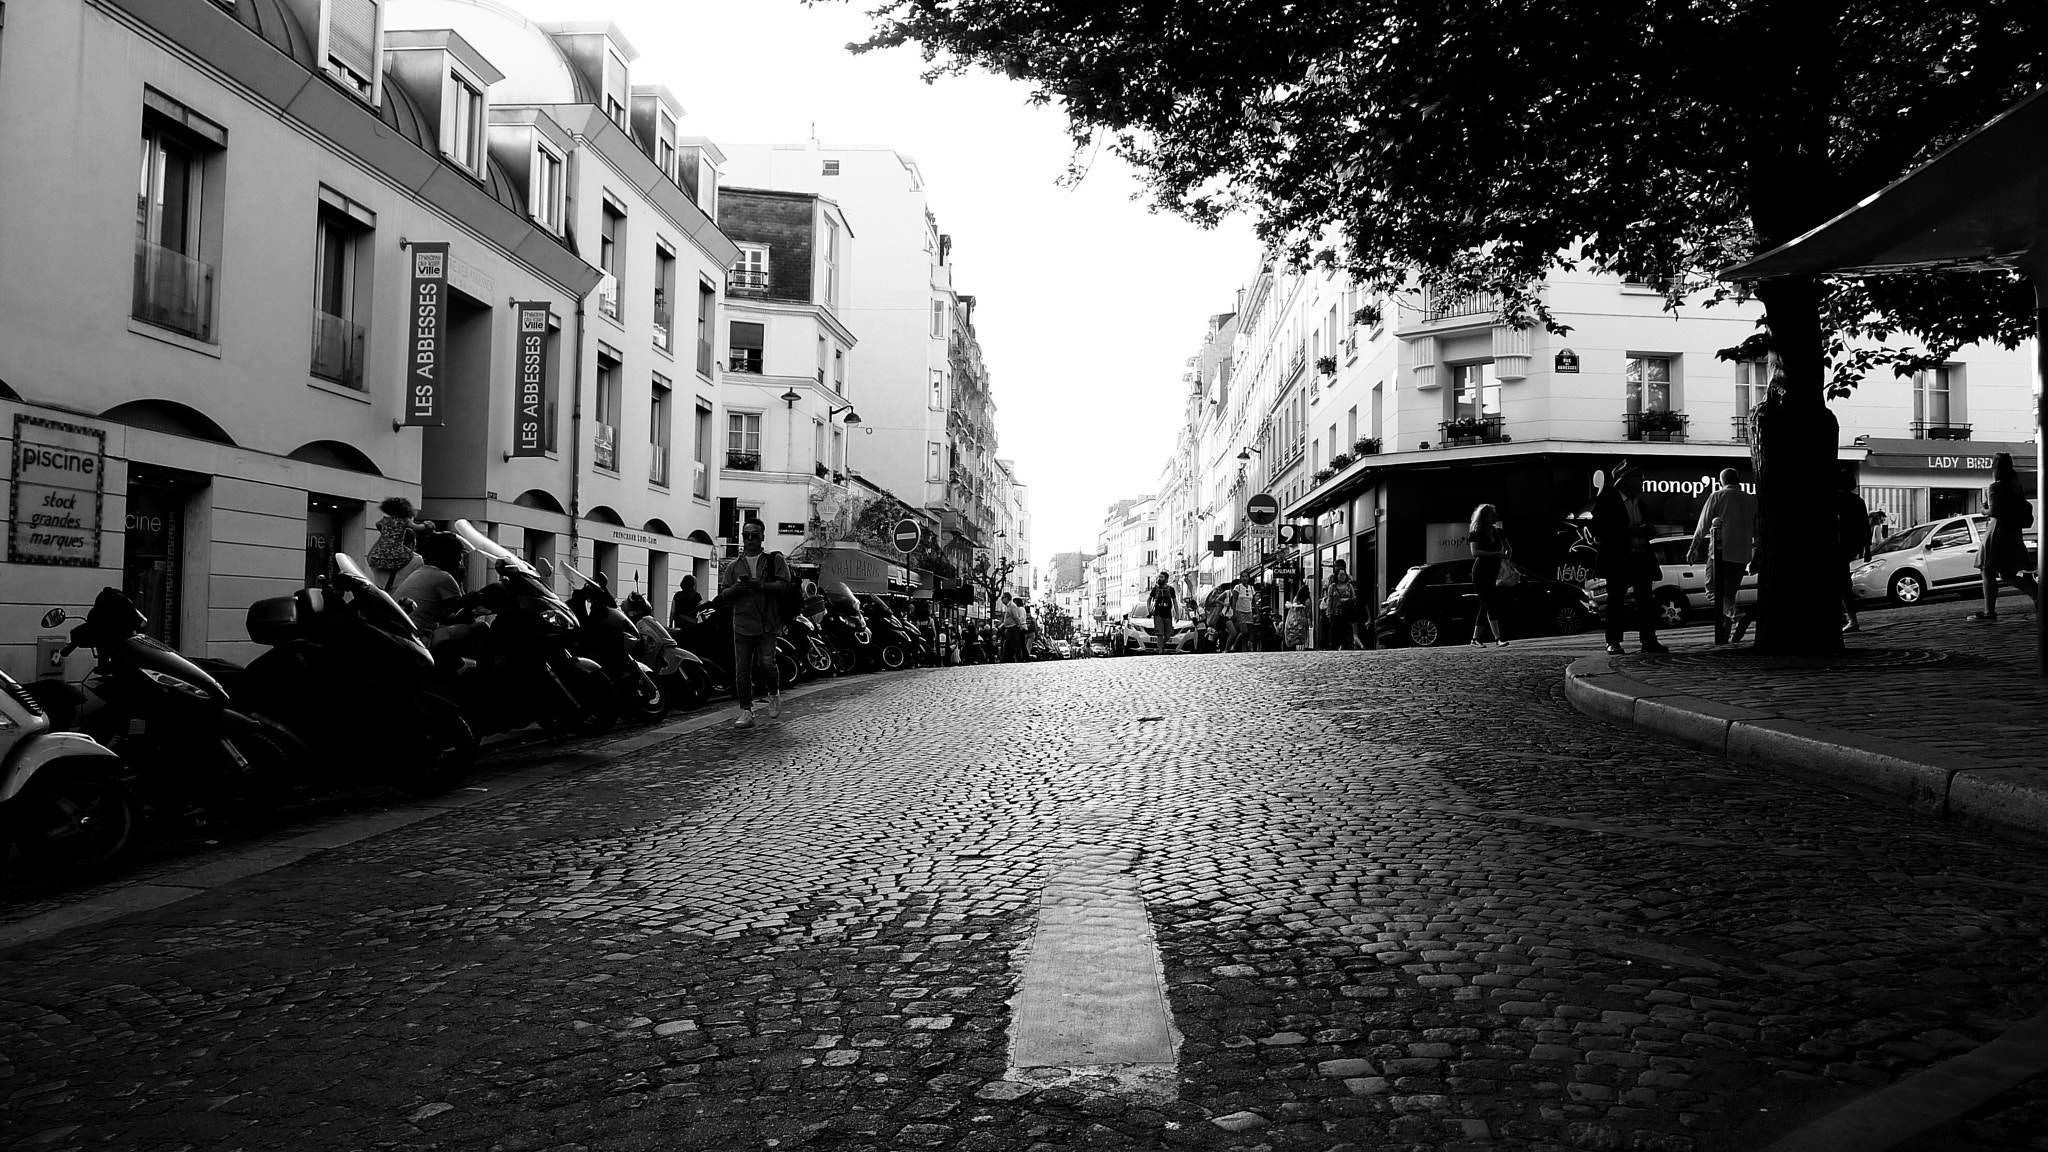 Leica D-LUX 5 sample photo. “a montmartre” photography